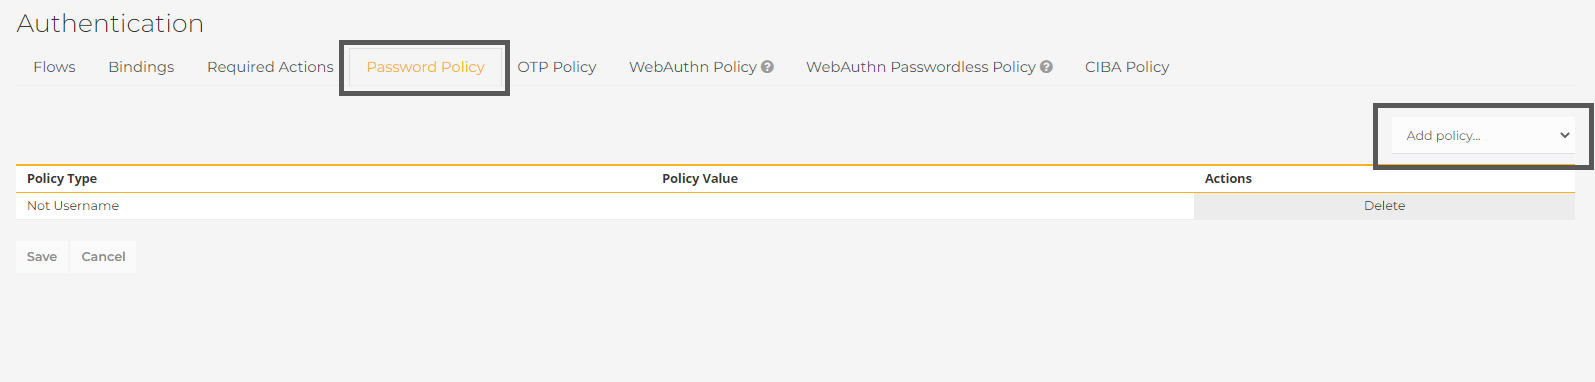 password policy base